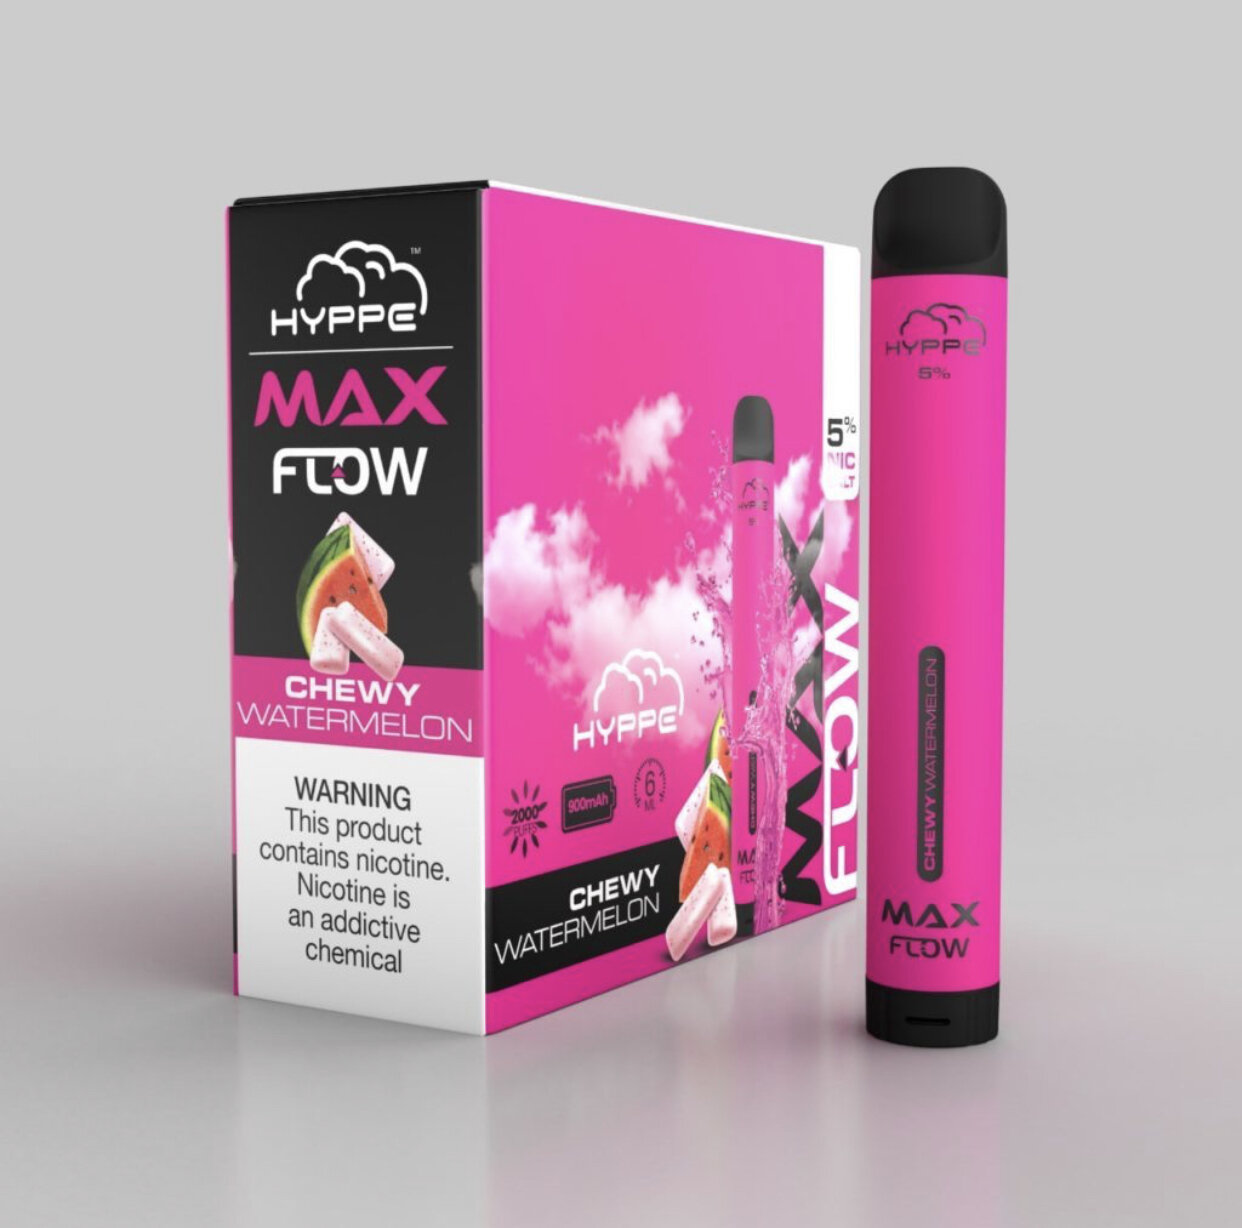 Hyppe Max Flow 5% Chewy Watermelon